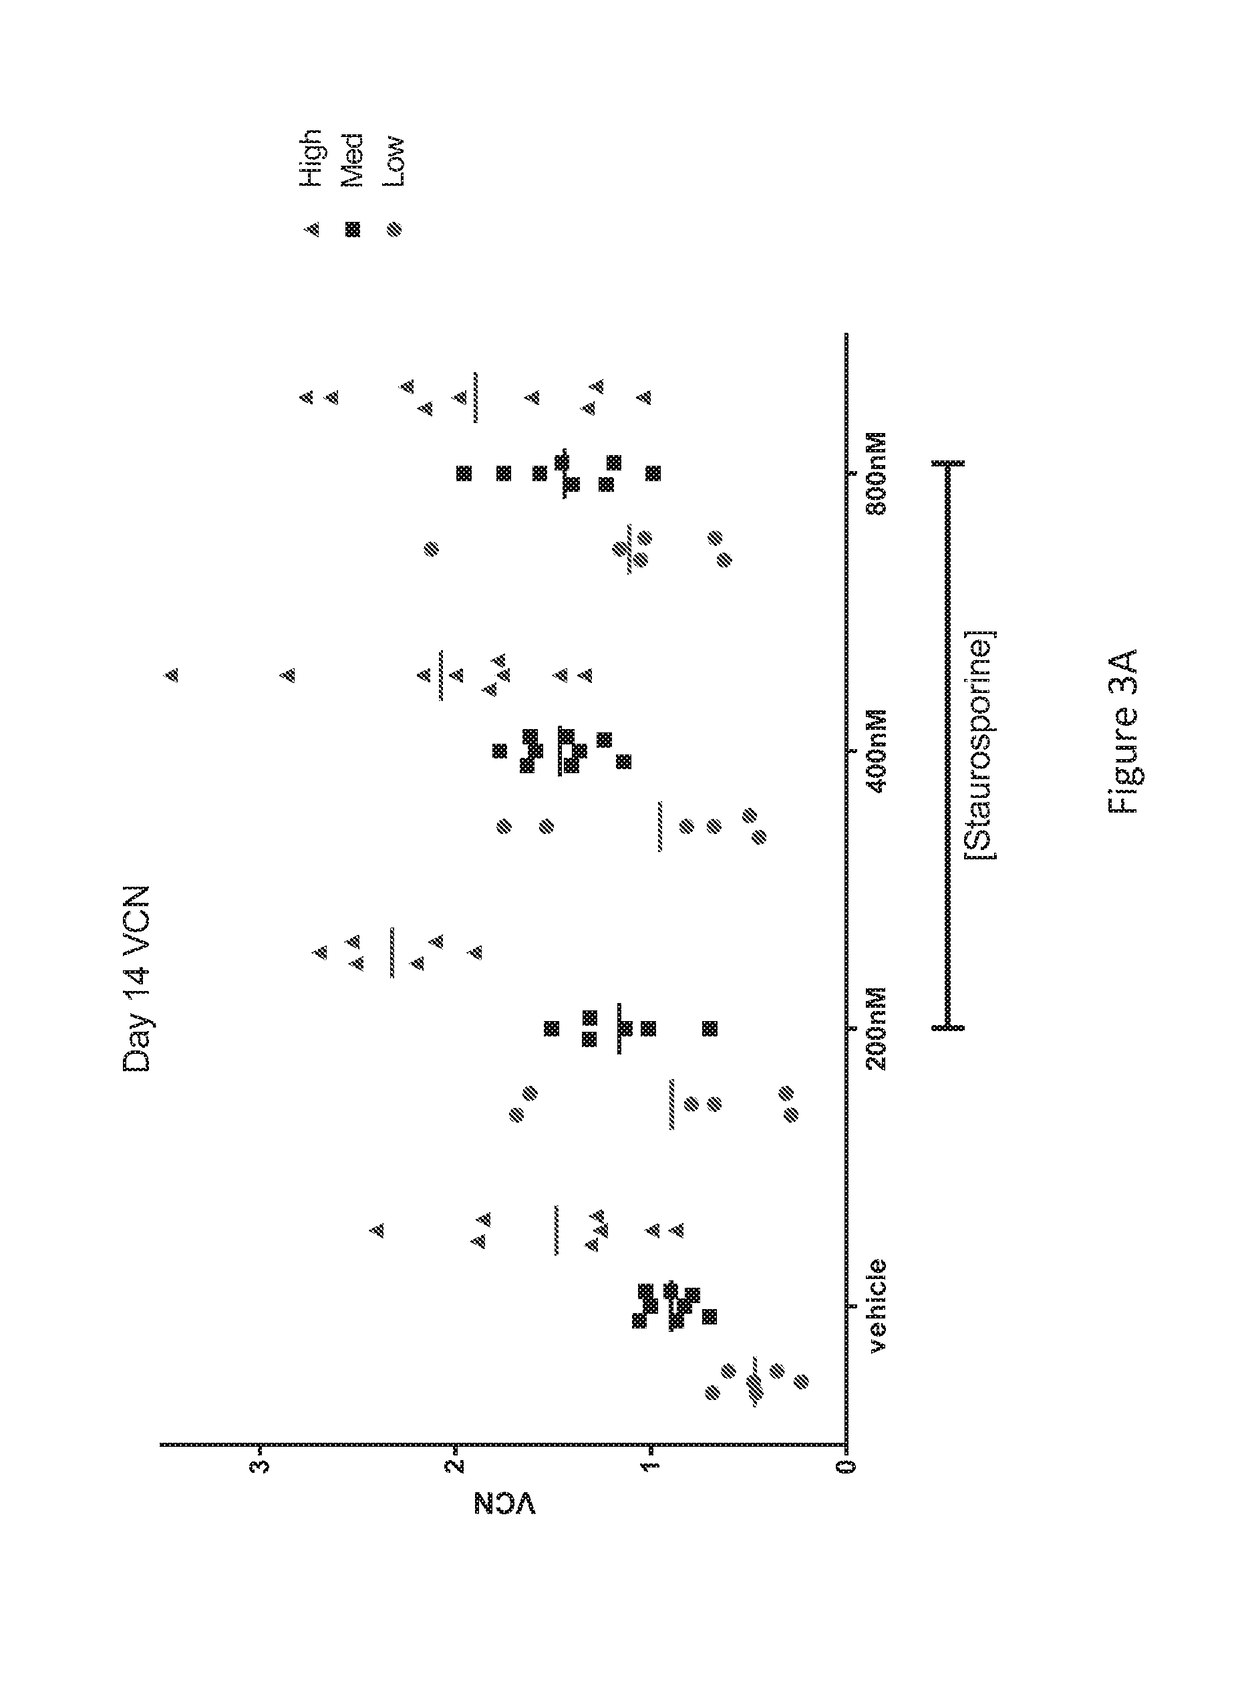 Vcn enhancer compositions and methods of using the same